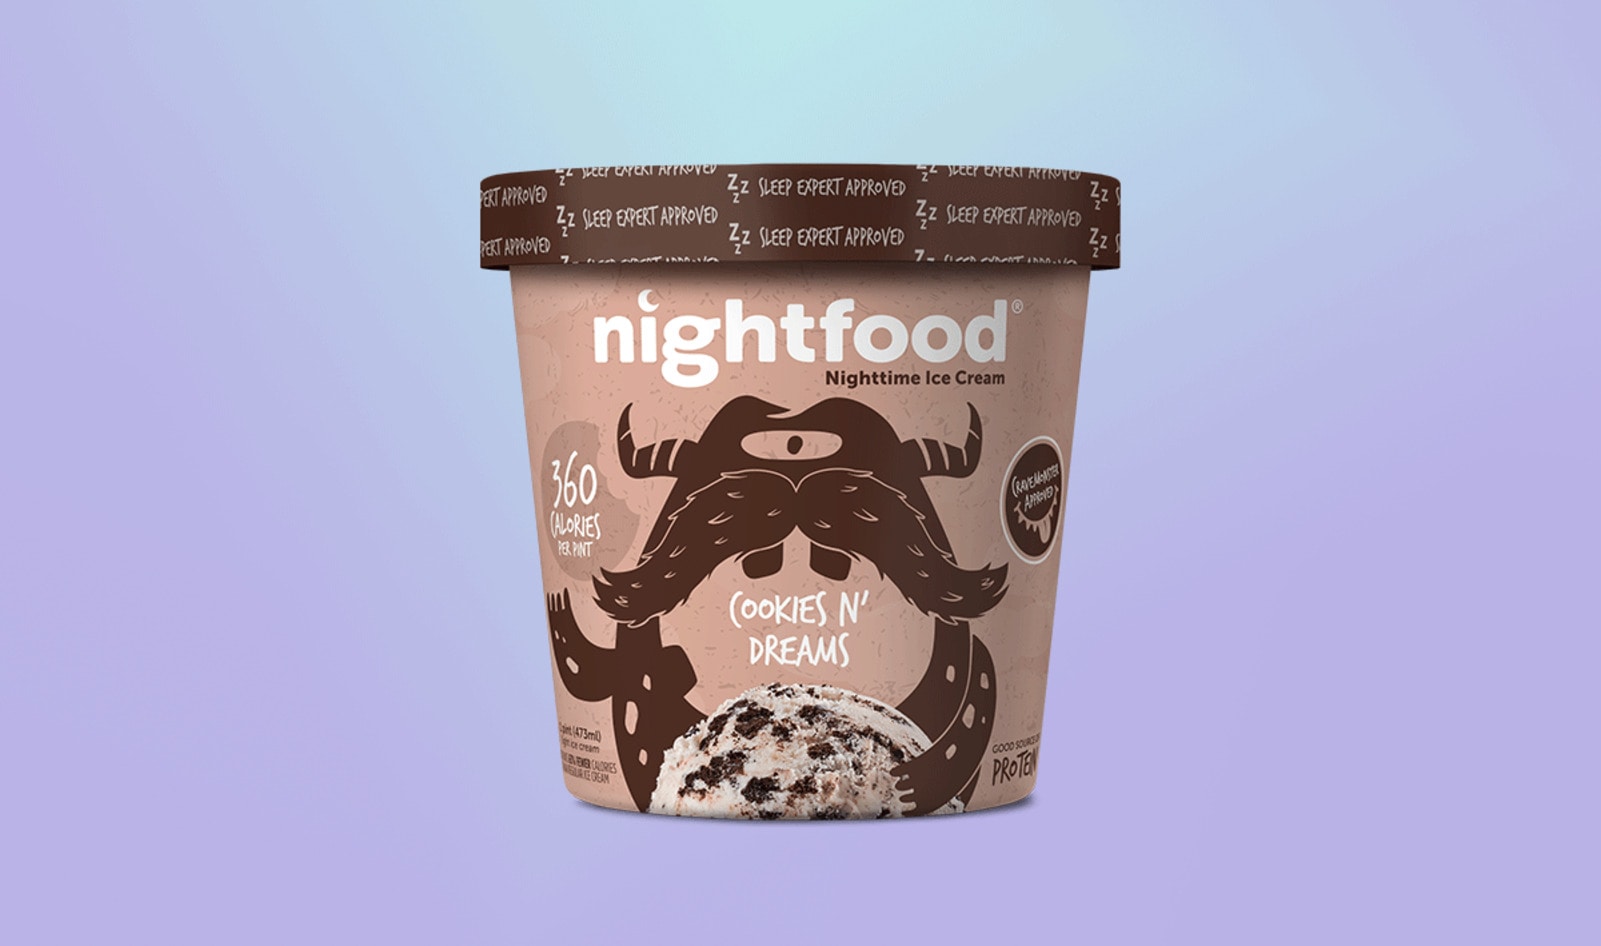 New “Nighttime” Vegan Ice Cream Simultaneously Cures Midnight Munchies and Insomnia